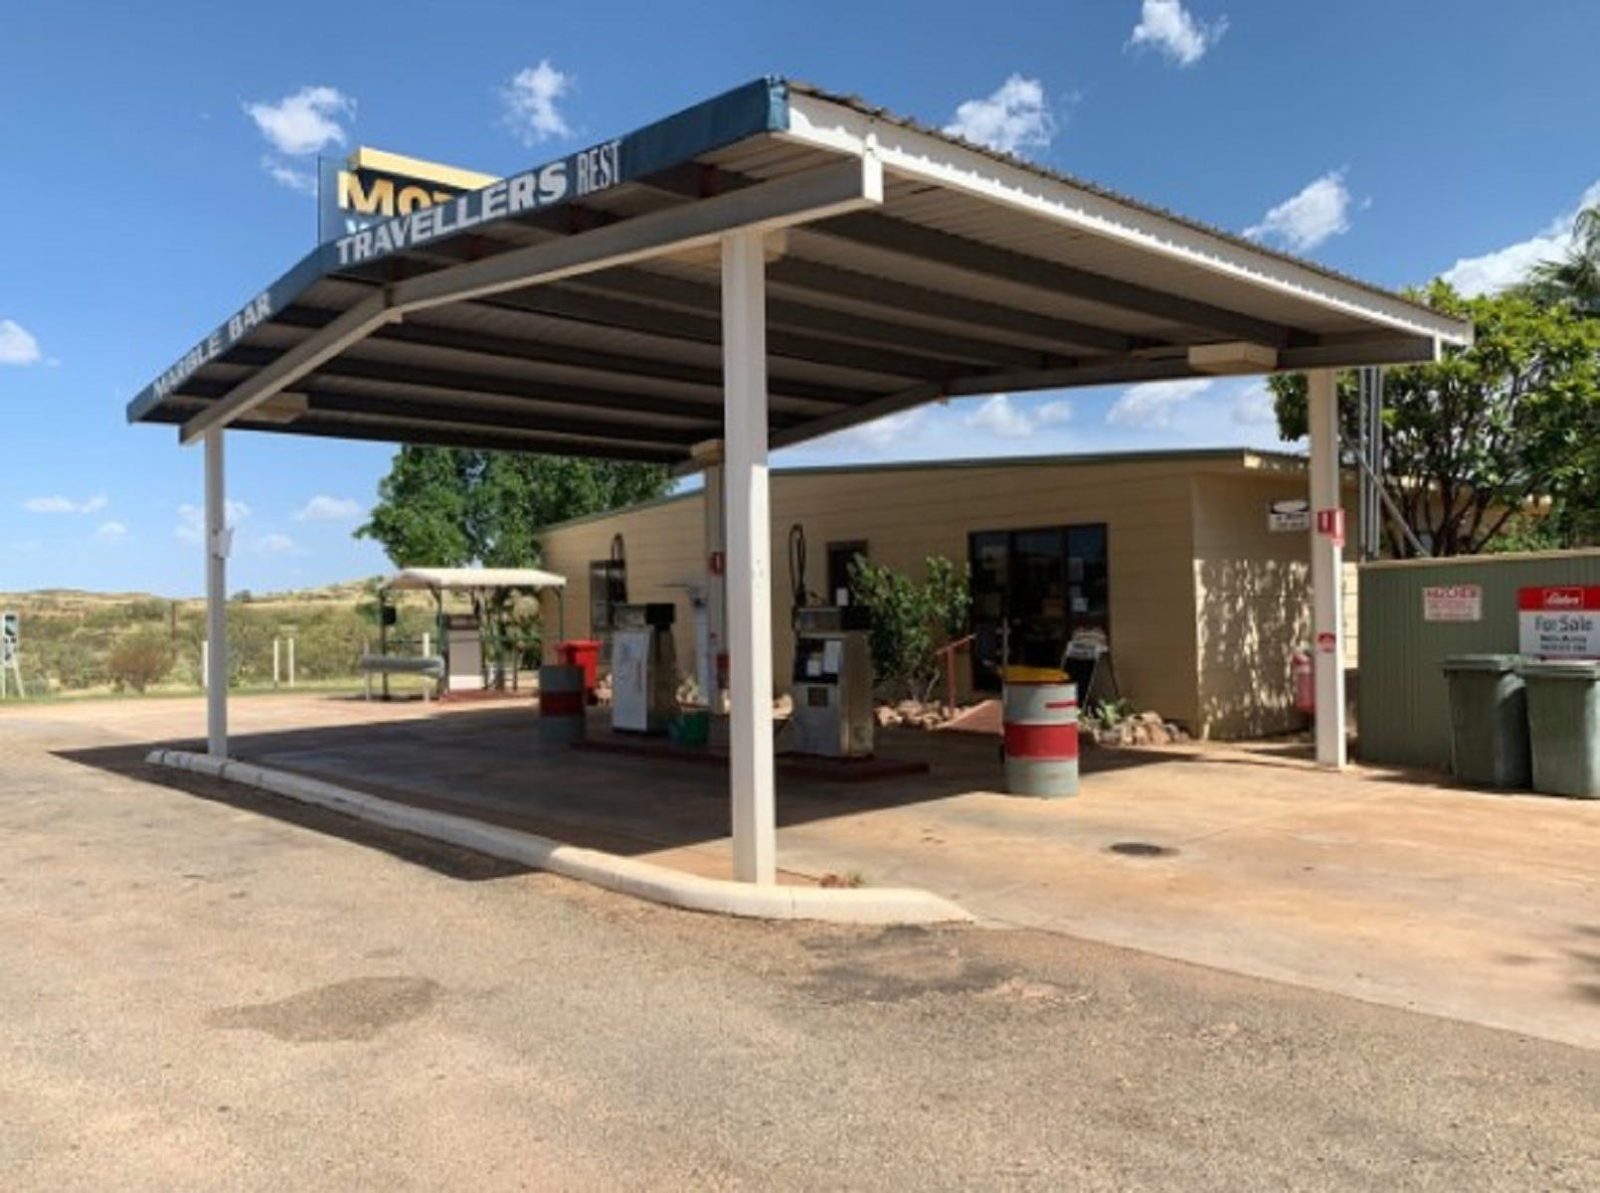 travellers rest marble bar wa